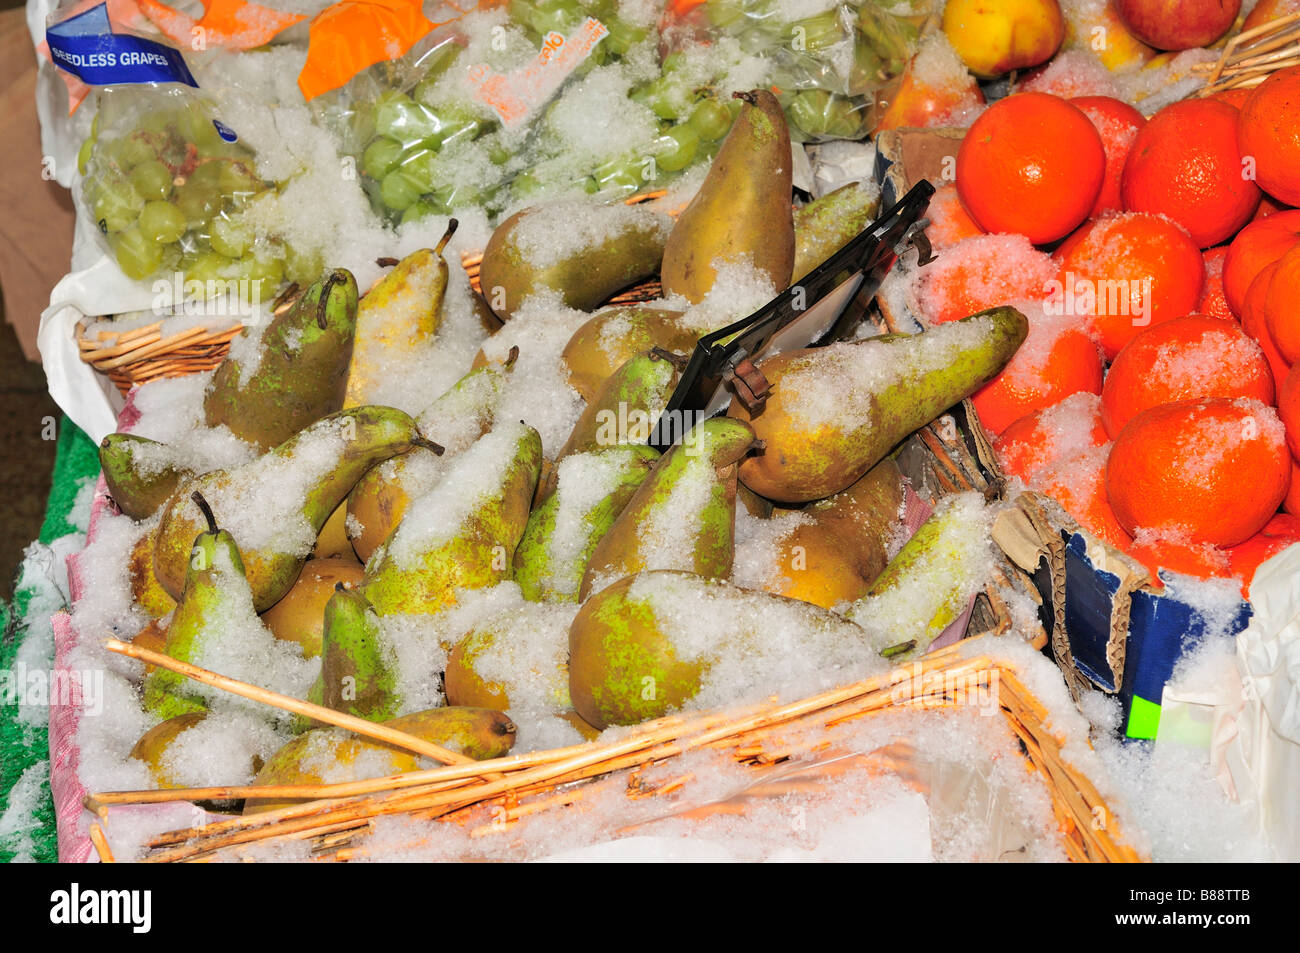 soft fruit covered in snow market stall Stock Photo